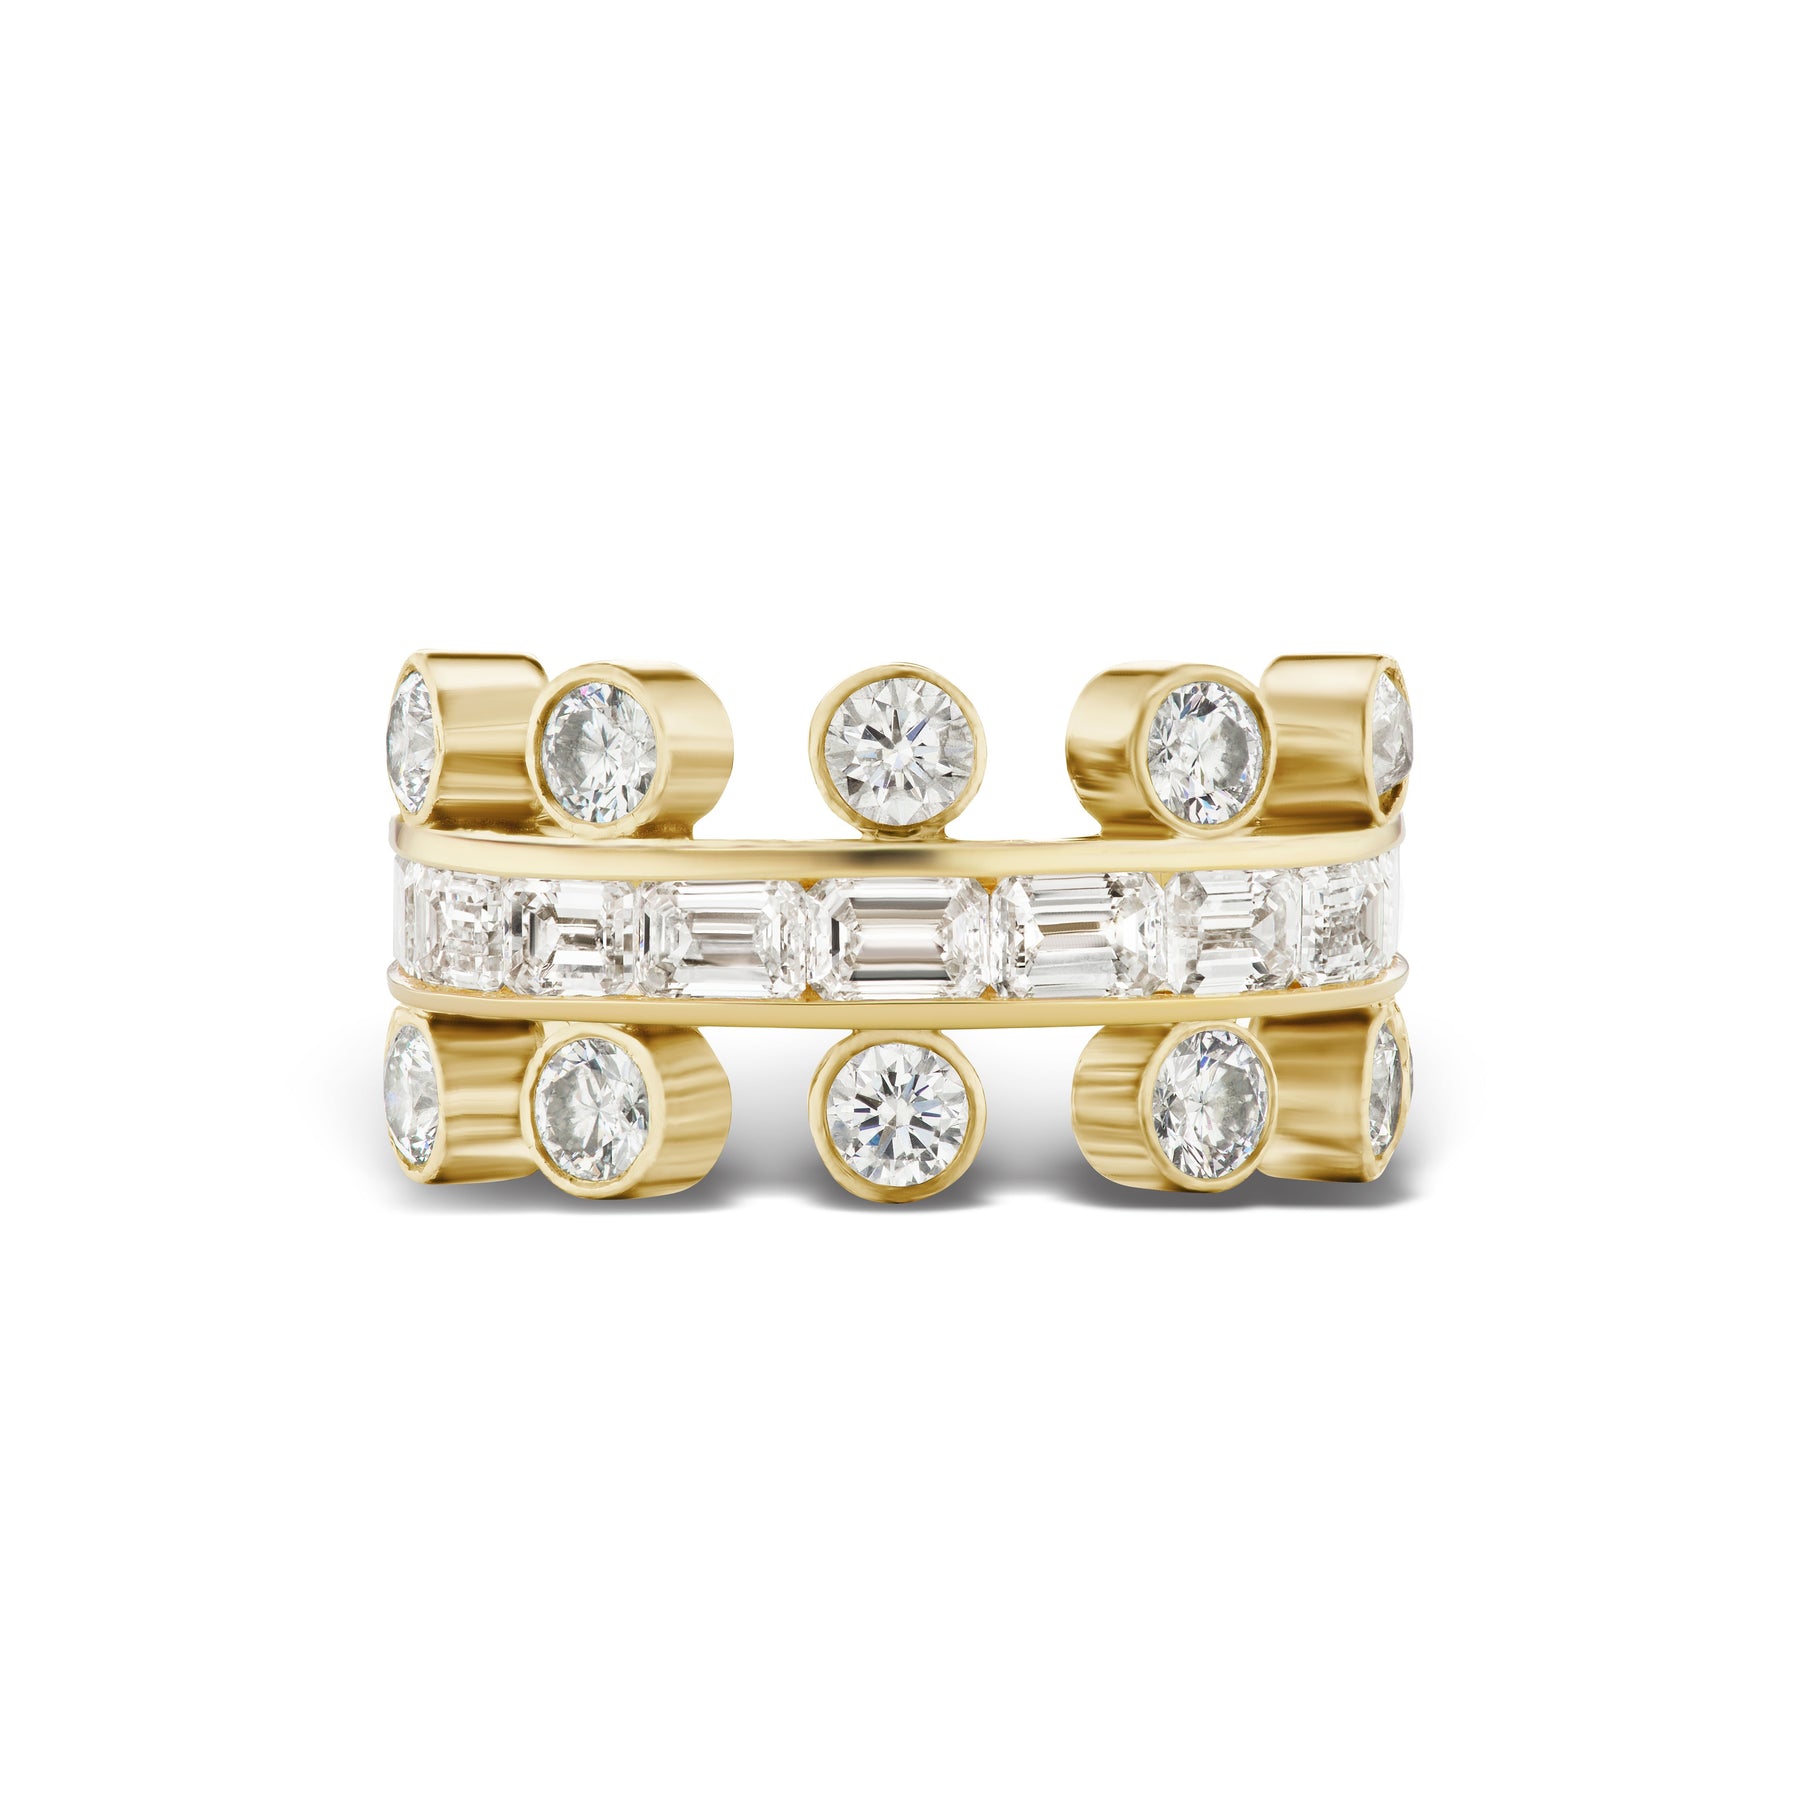 Crown Ring in Yellow Gold with Bezel Set Round and Emerald Cut Diamonds